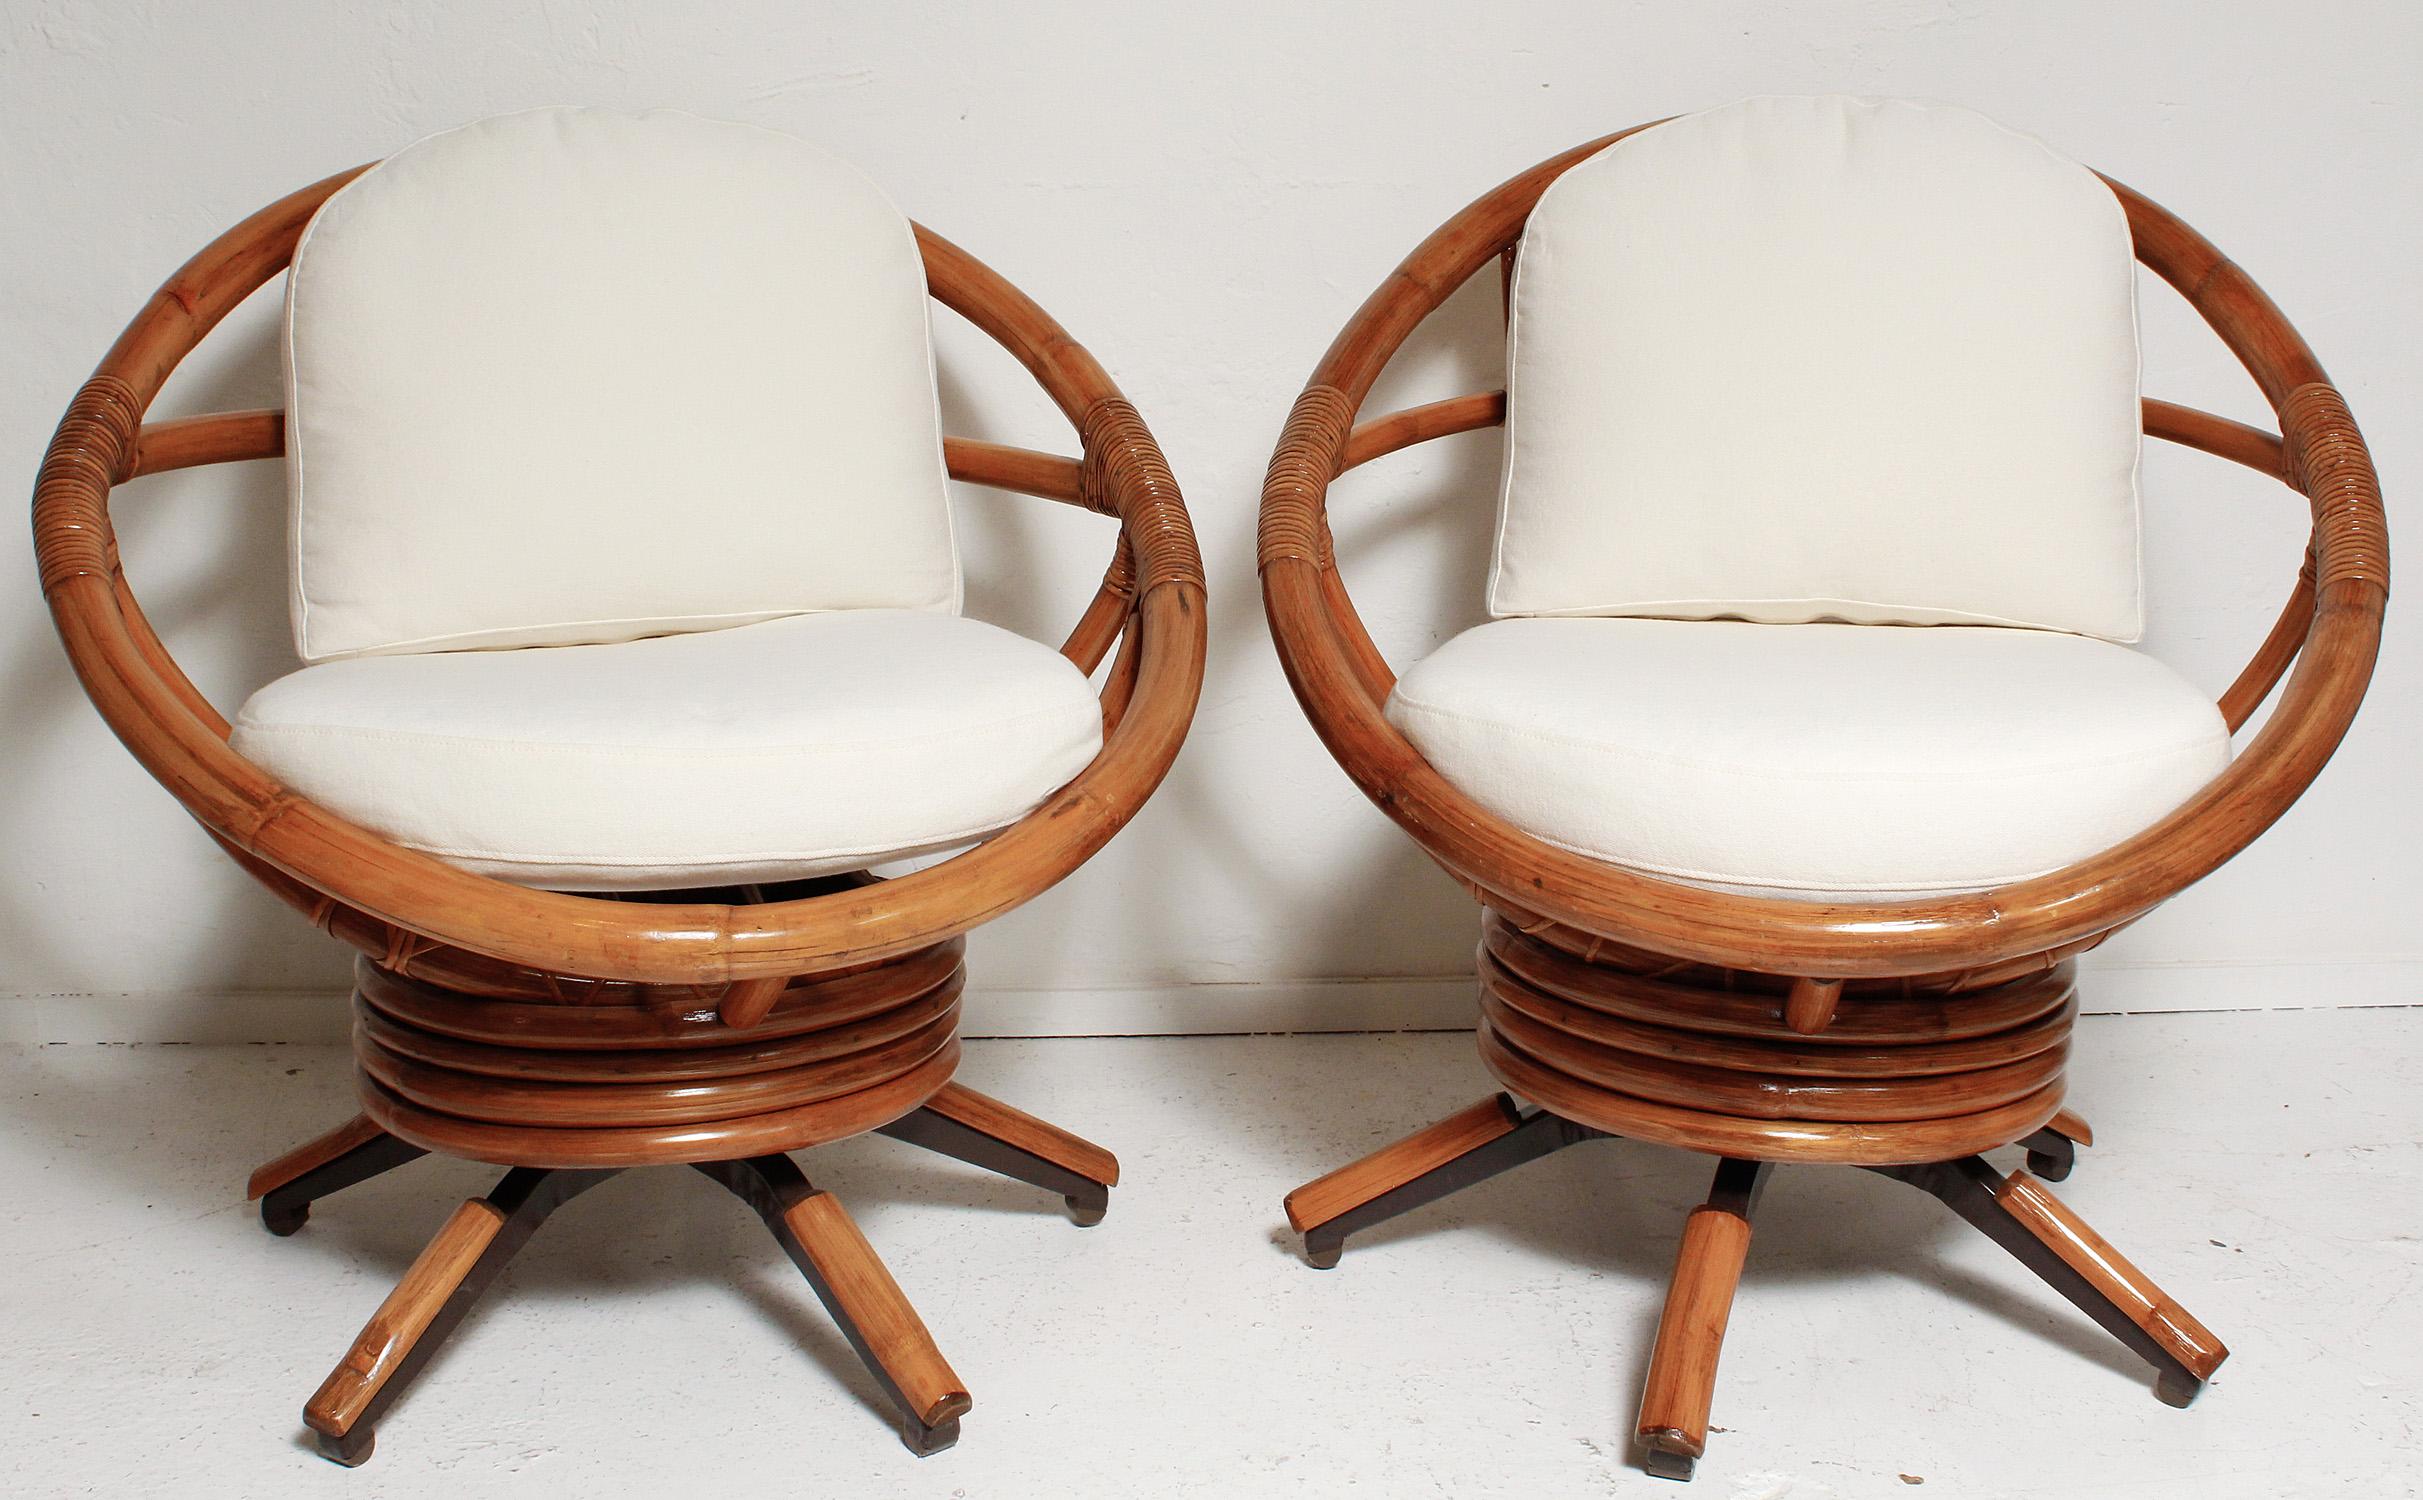 Swing out in this pair of fully restored bamboo swivel chairs with all new foam cushions and cotton twill upholstery.